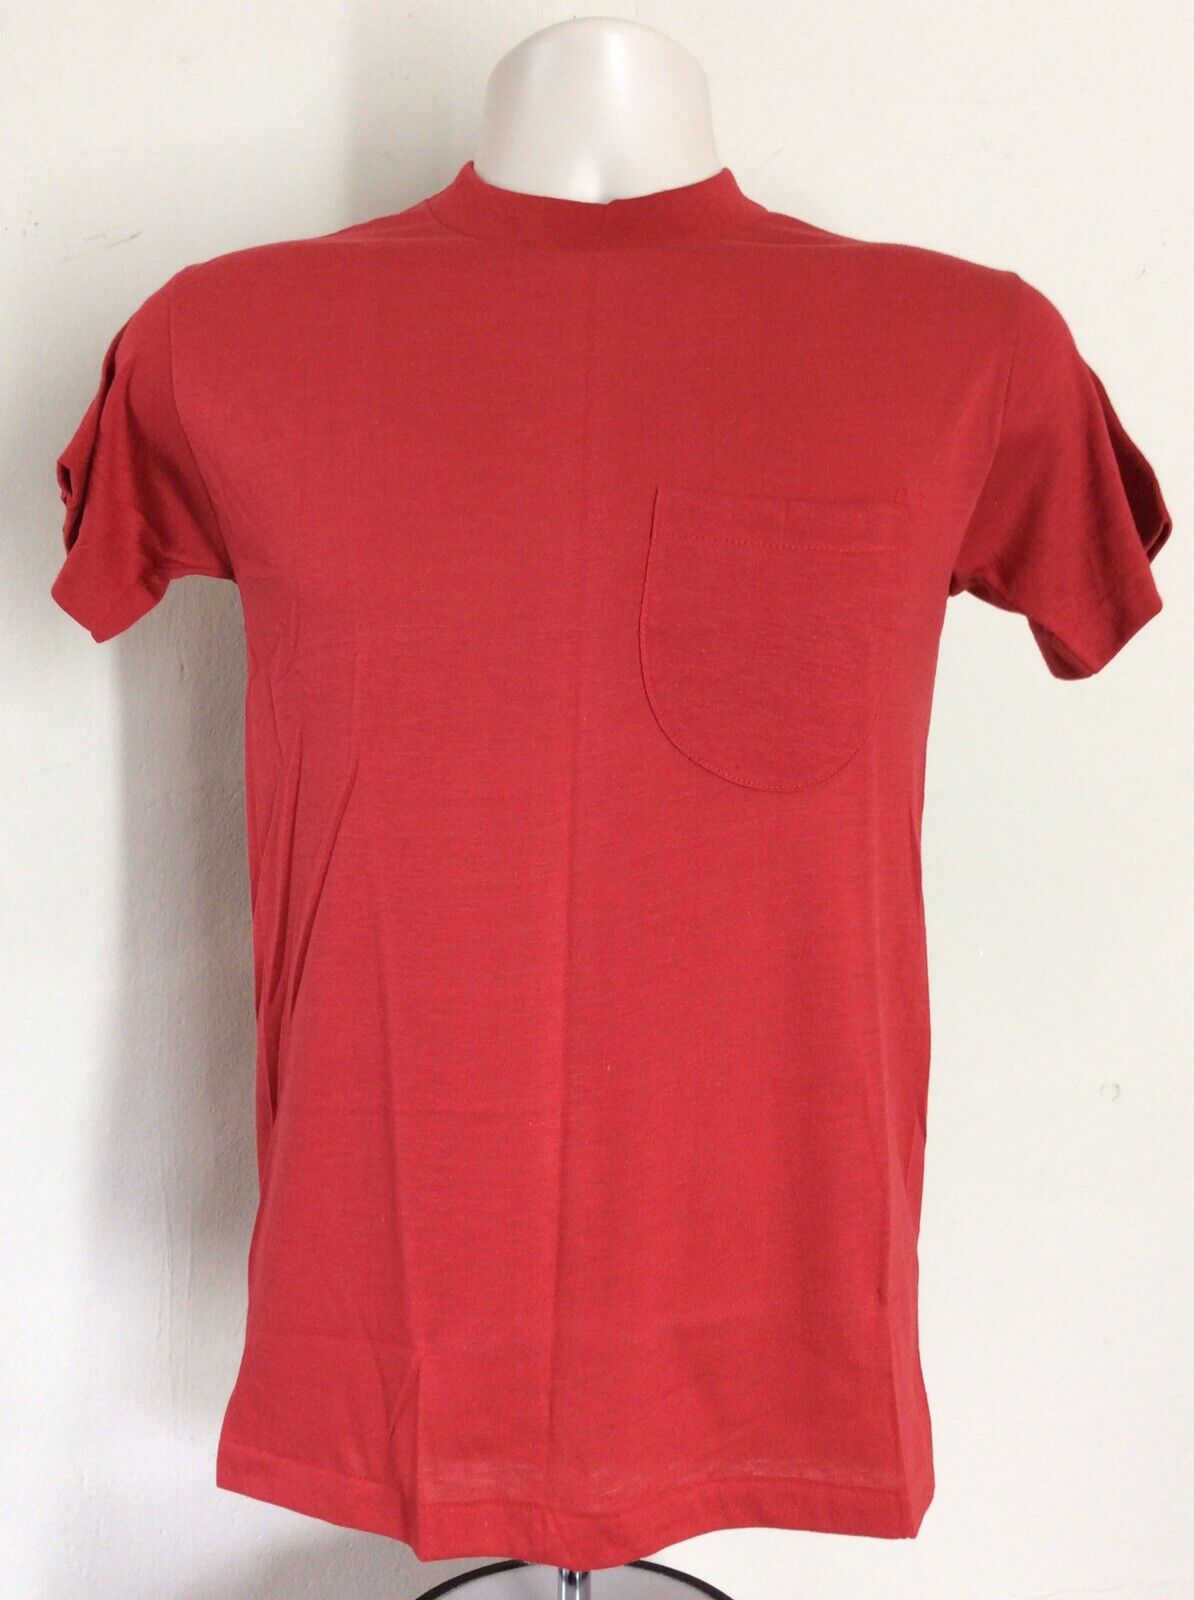 Vtg 80s 90s Dickies Plain Red Pocket T-Shirt XS/S Blank Made In 